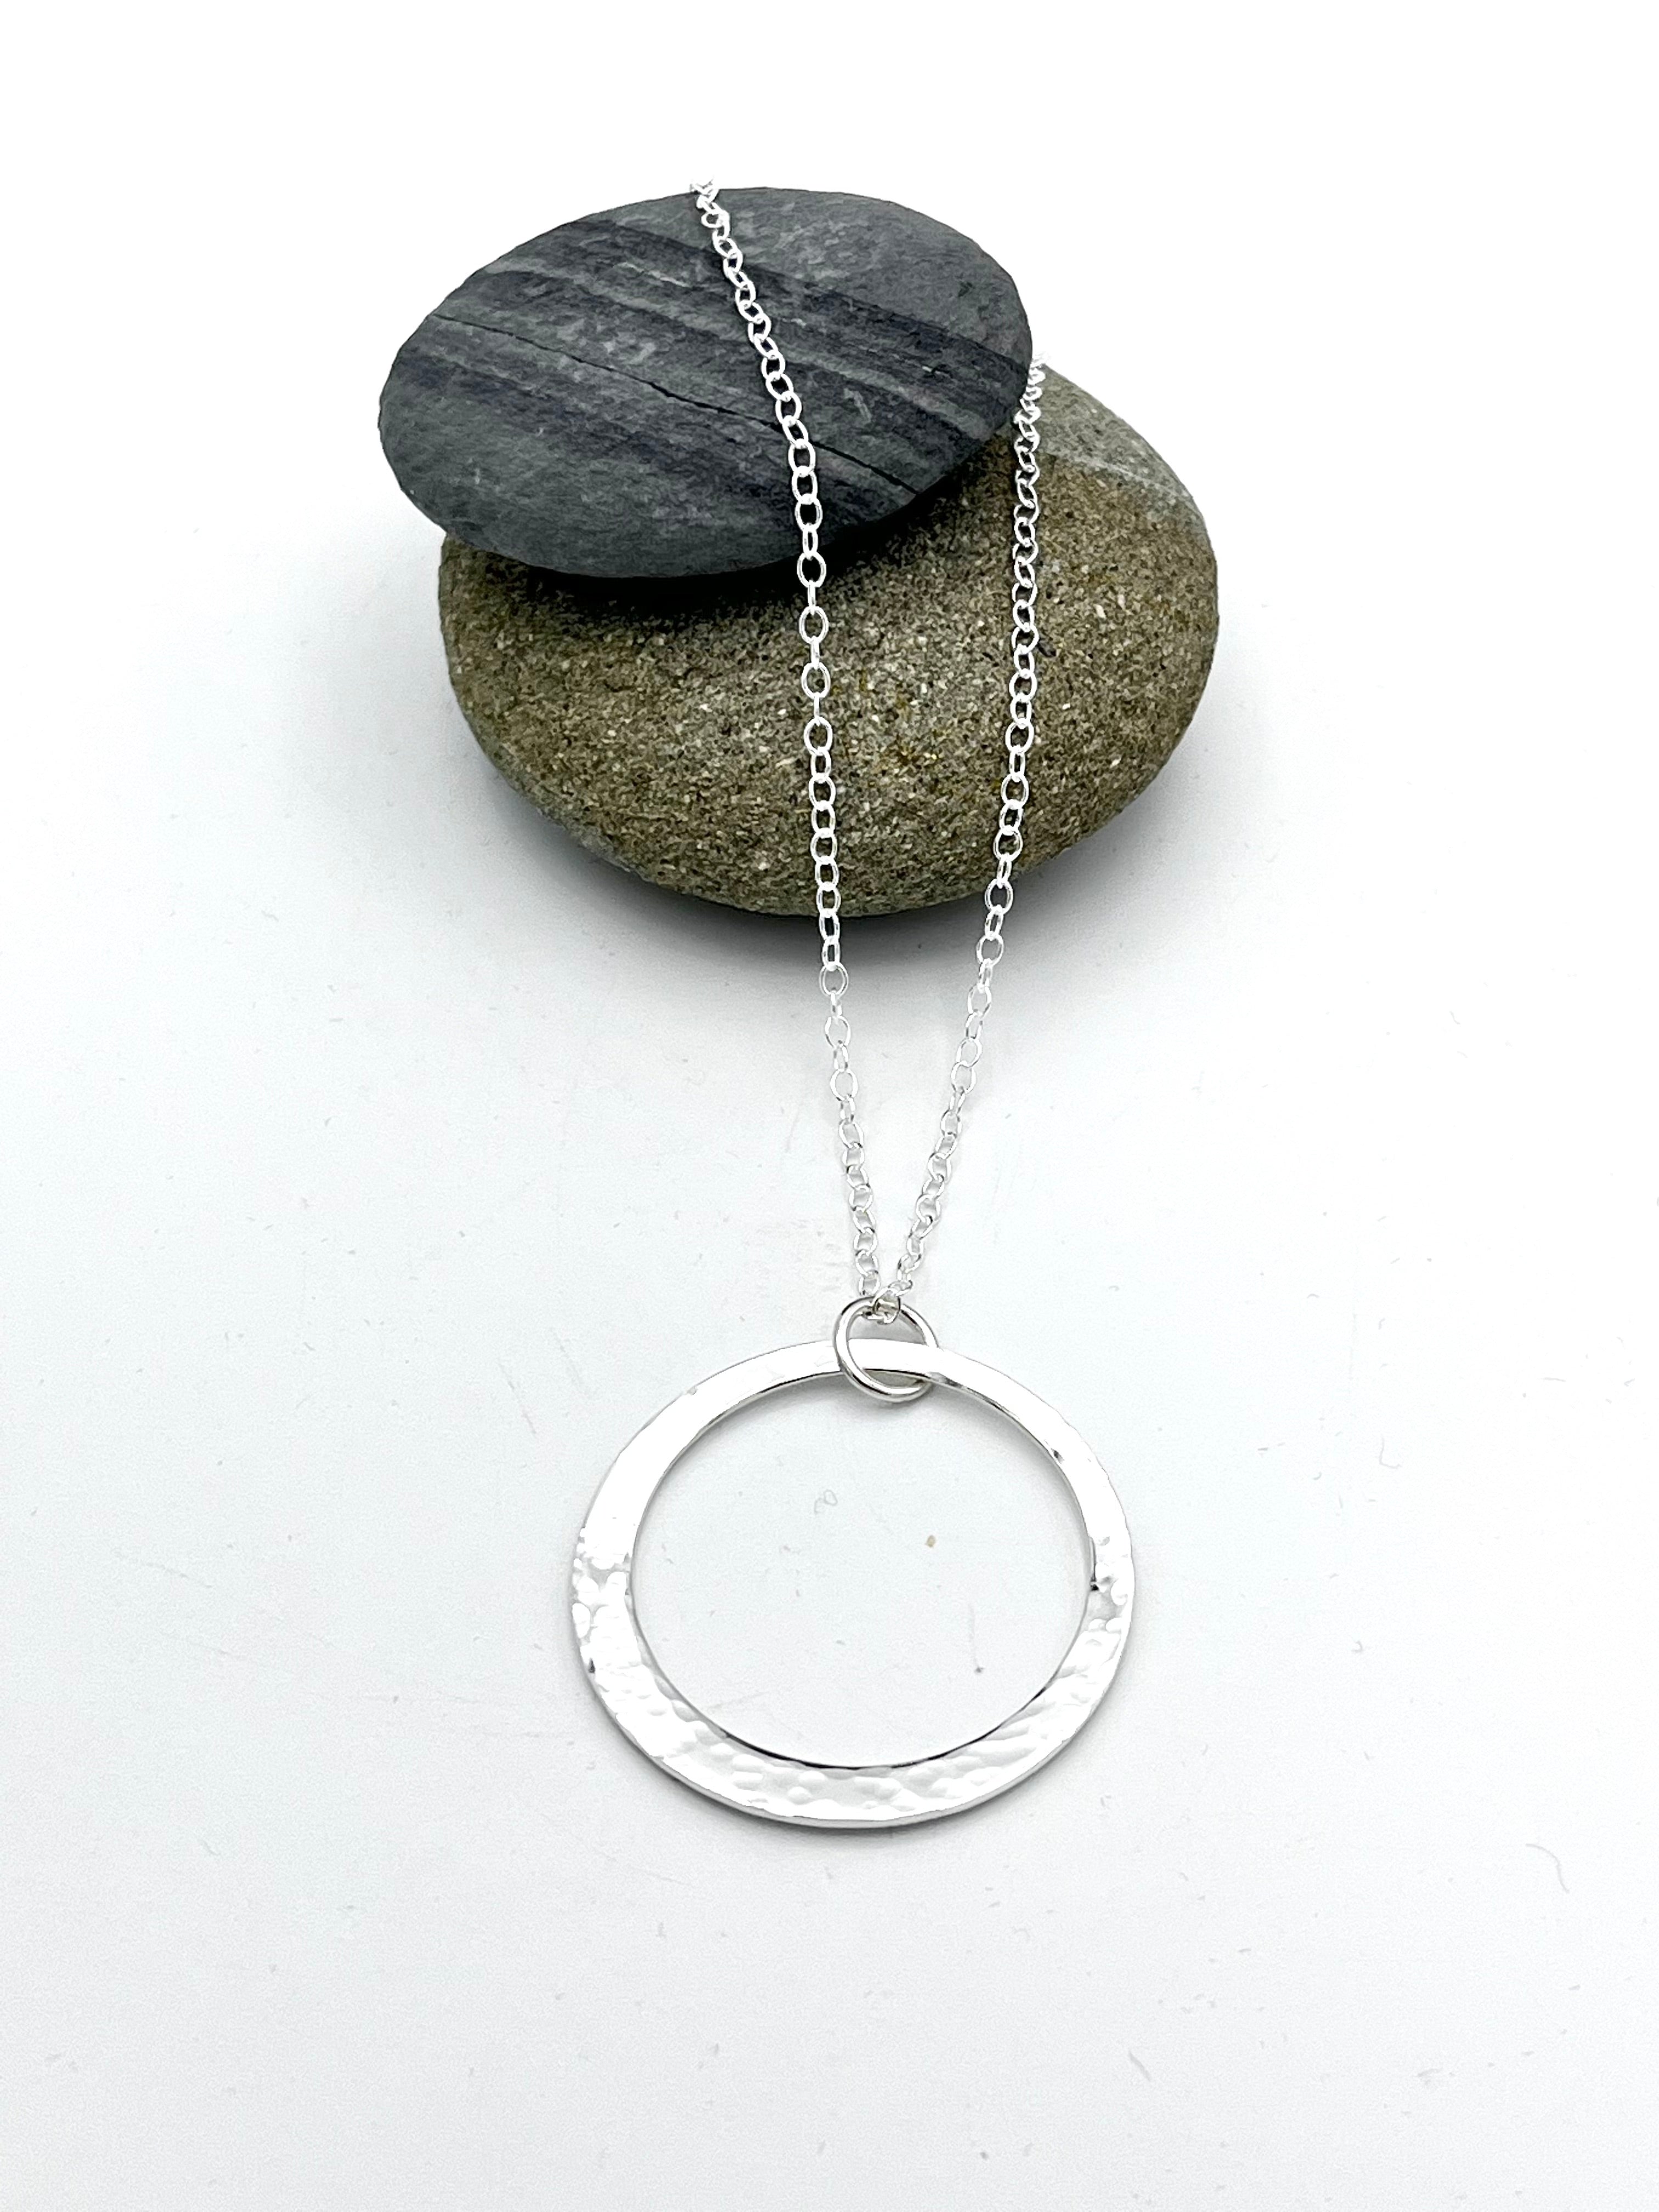 Sterling Silver Pendant. Single offset ring pendant 32mm wide hammered finish